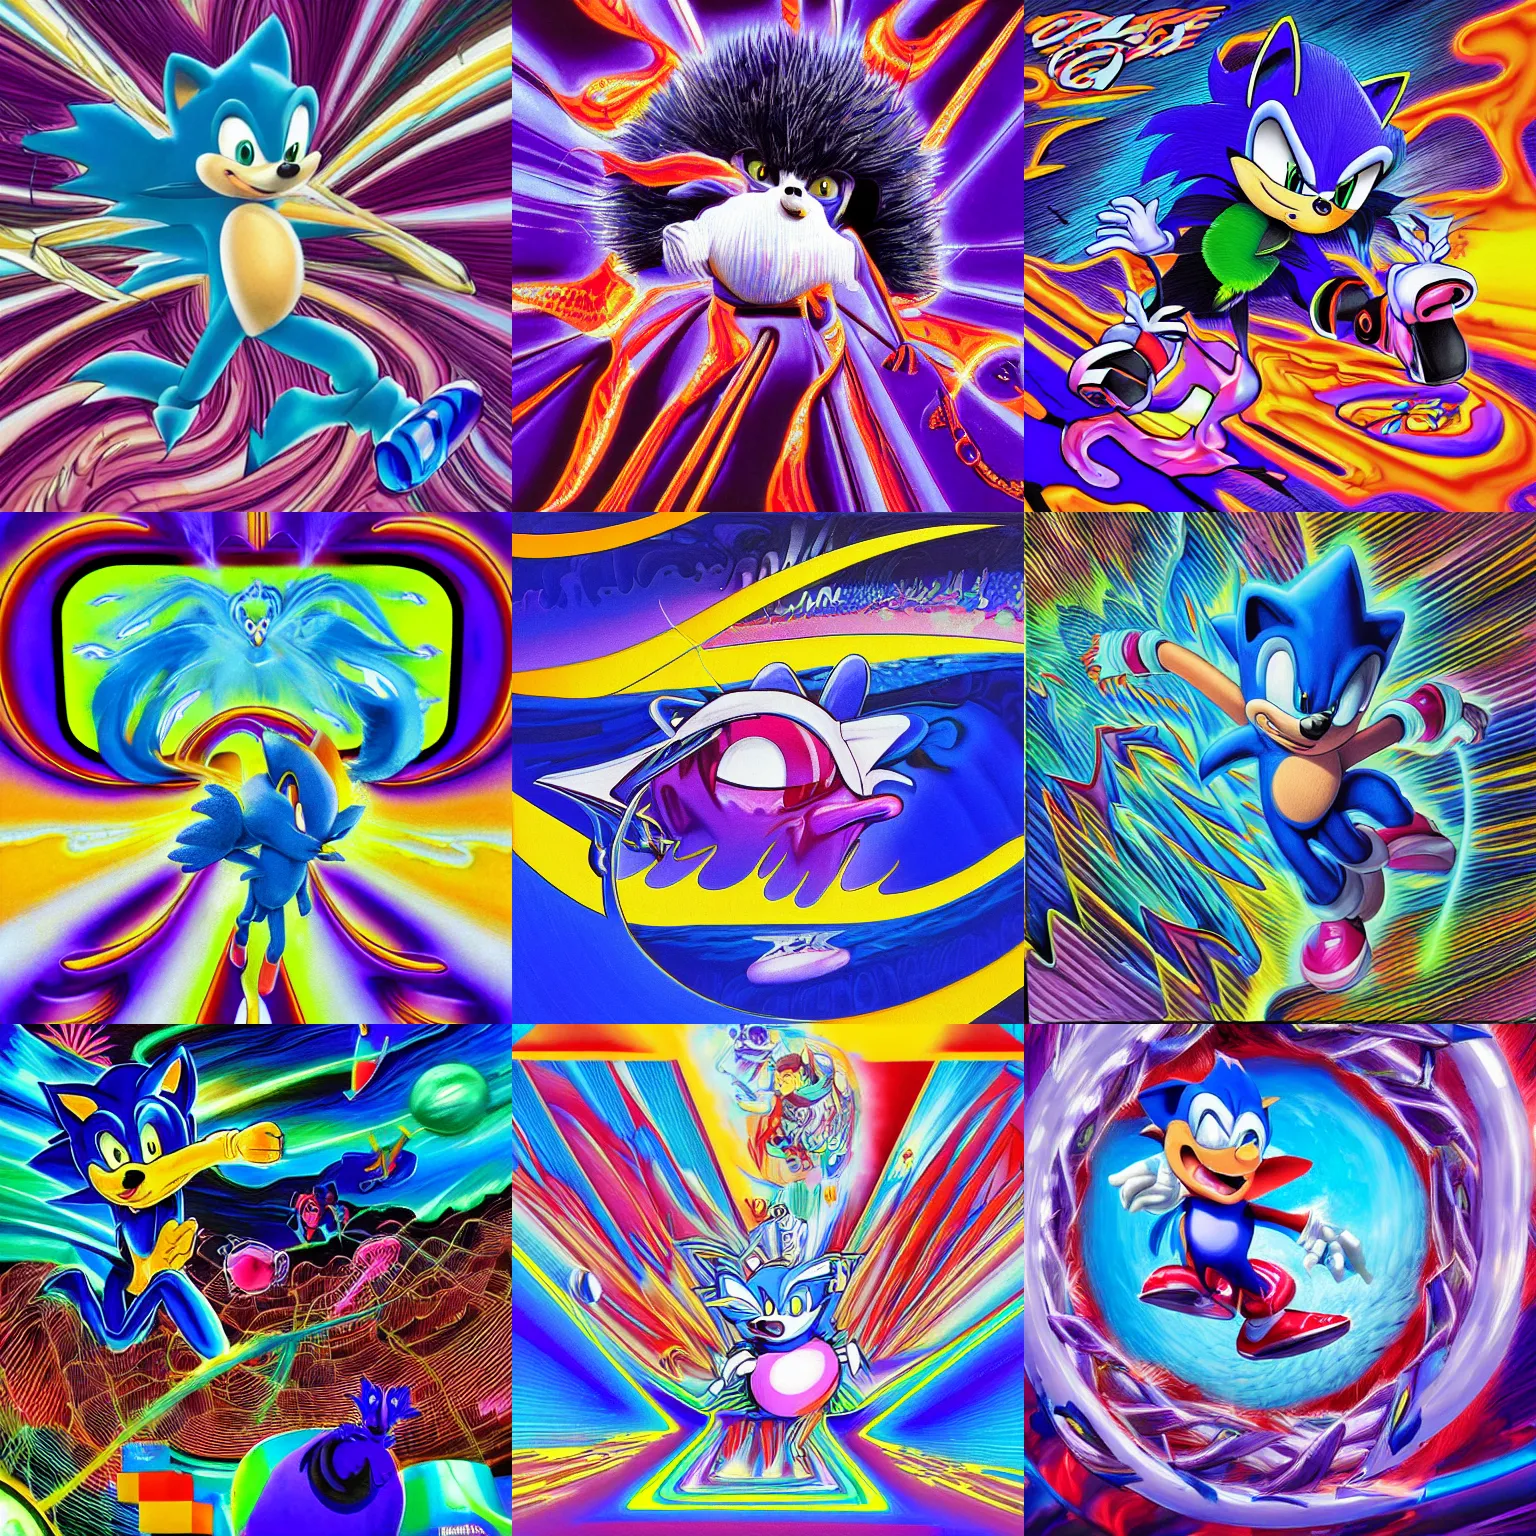 Prompt: surreal, recursive, sharp, detailed professional, high quality airbrush art MGMT album cover portrait of a liquid dissolving LSD DMT blue sonic the hedgehog surfing through cyberspace, purple checkerboard background, 1990s 1992 Sega Genesis video game album cover